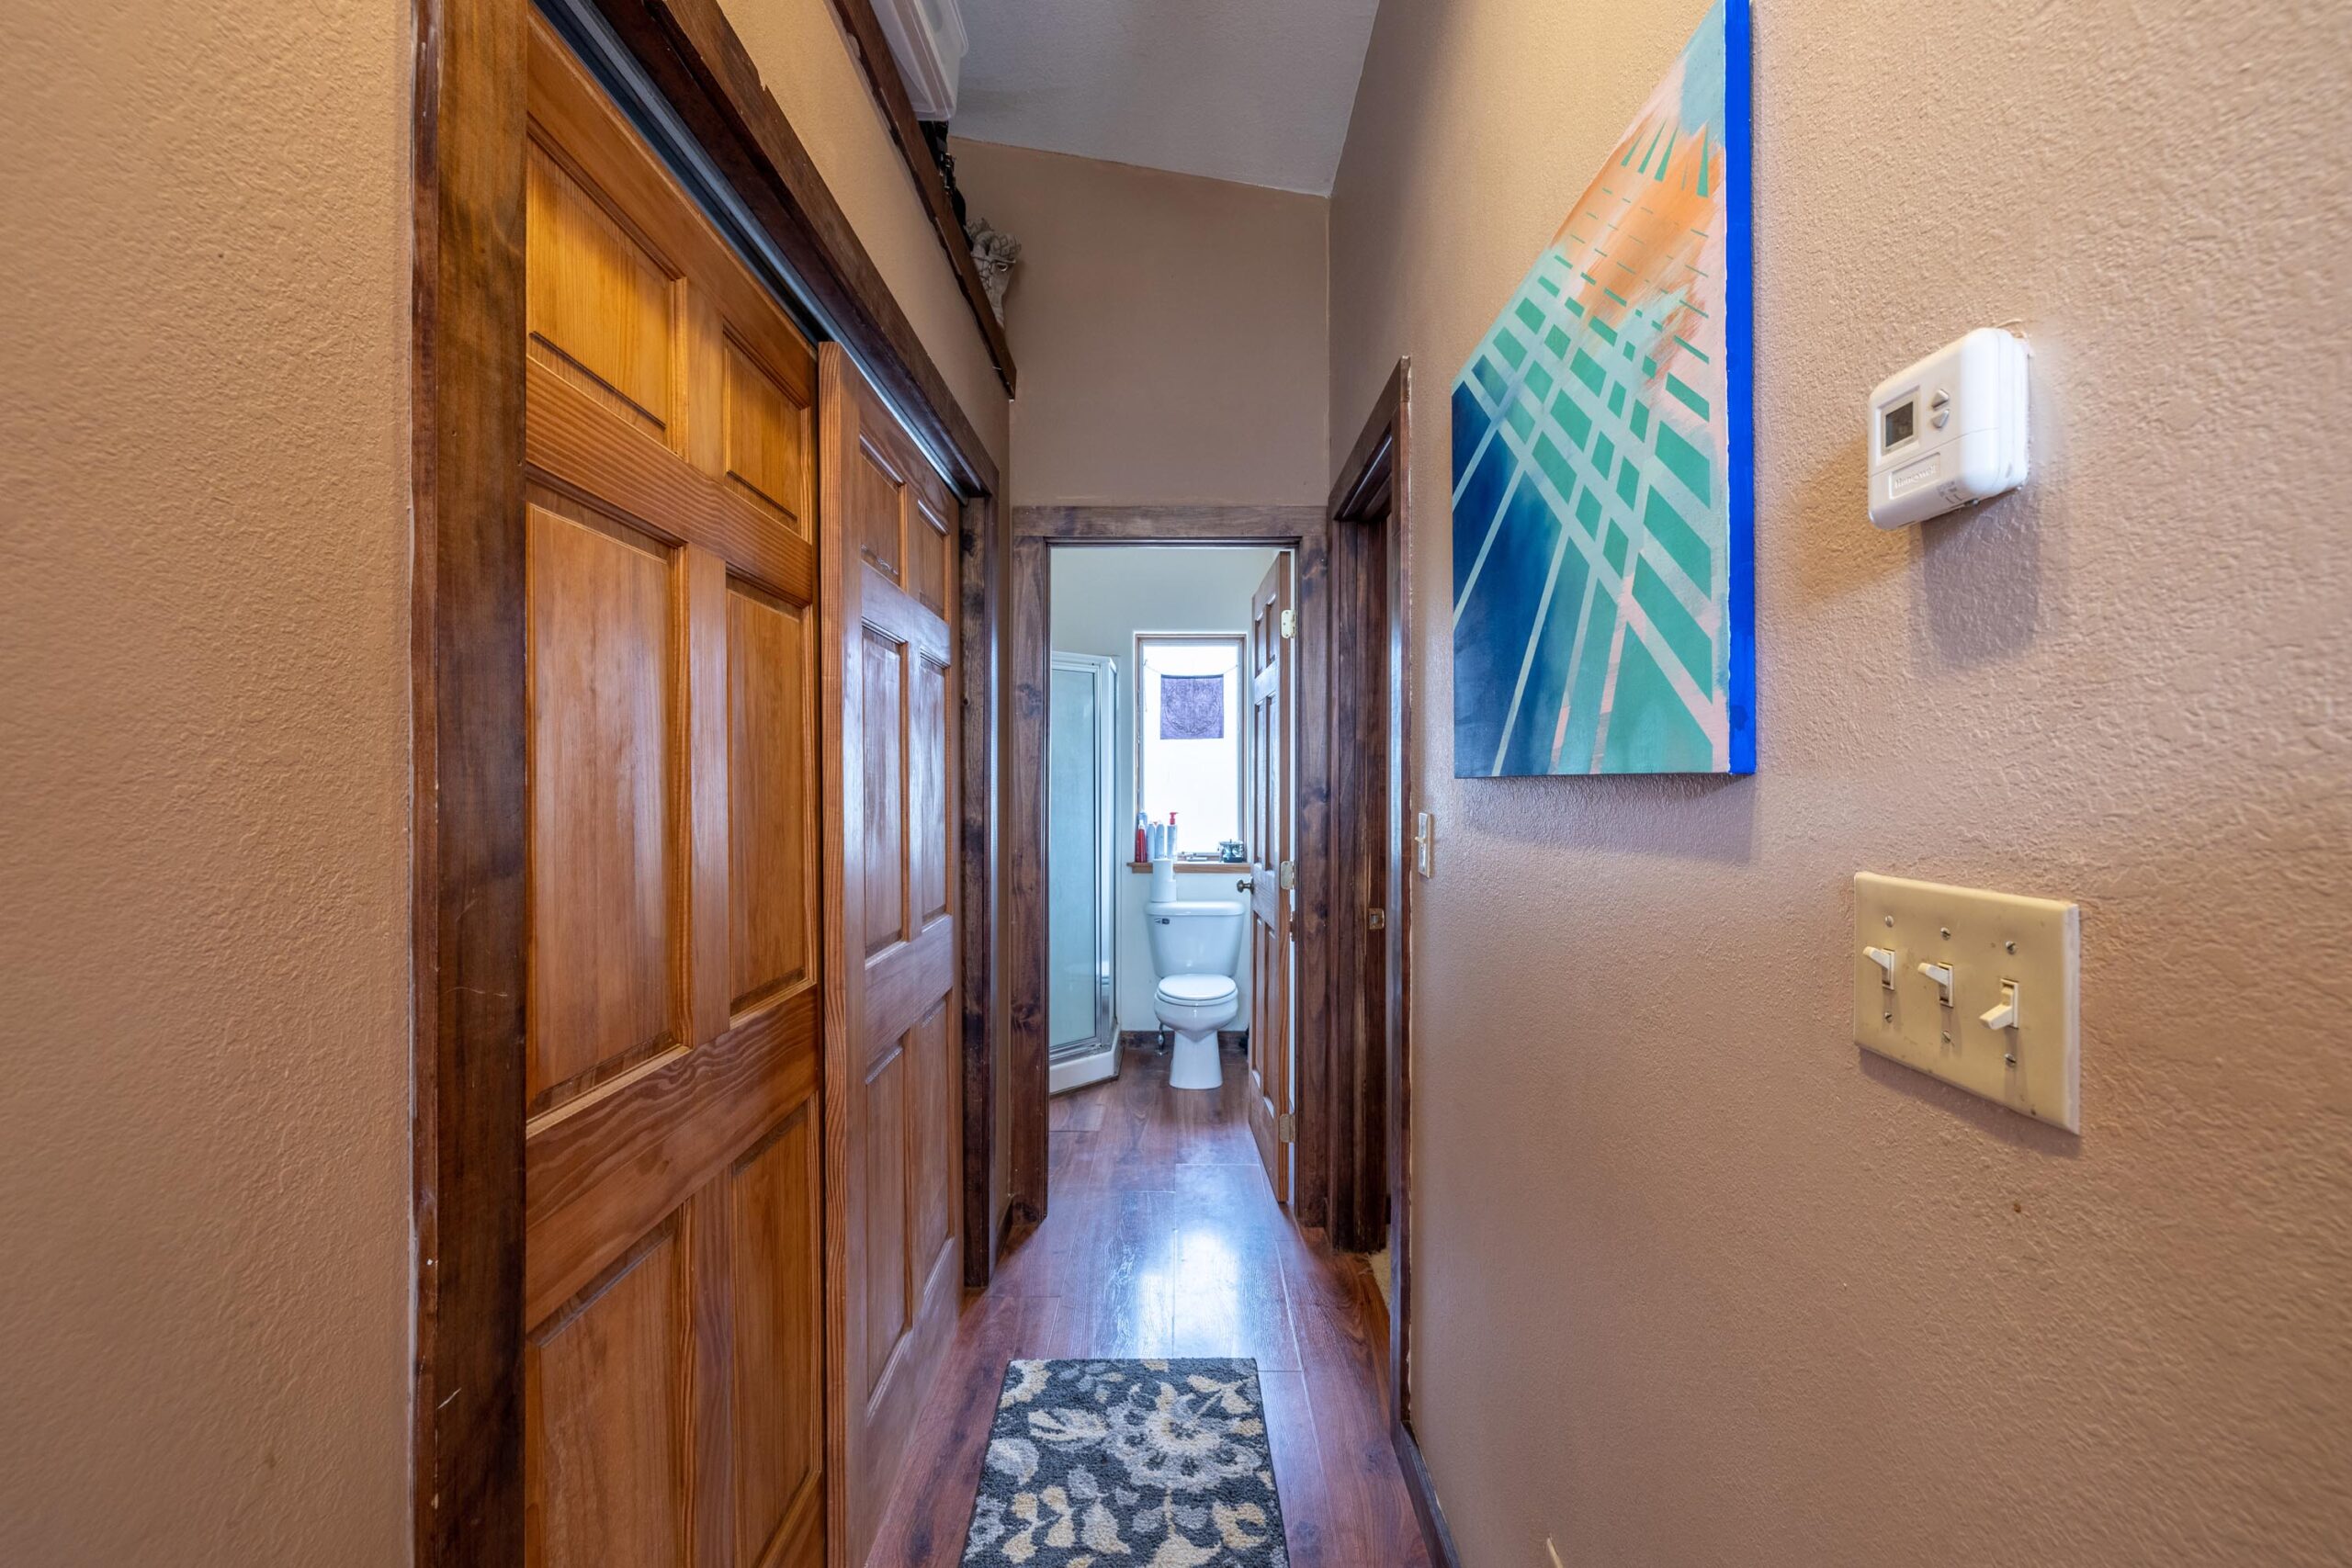 571 Riverland Drive, Crested Butte Colorado - apartment hallway